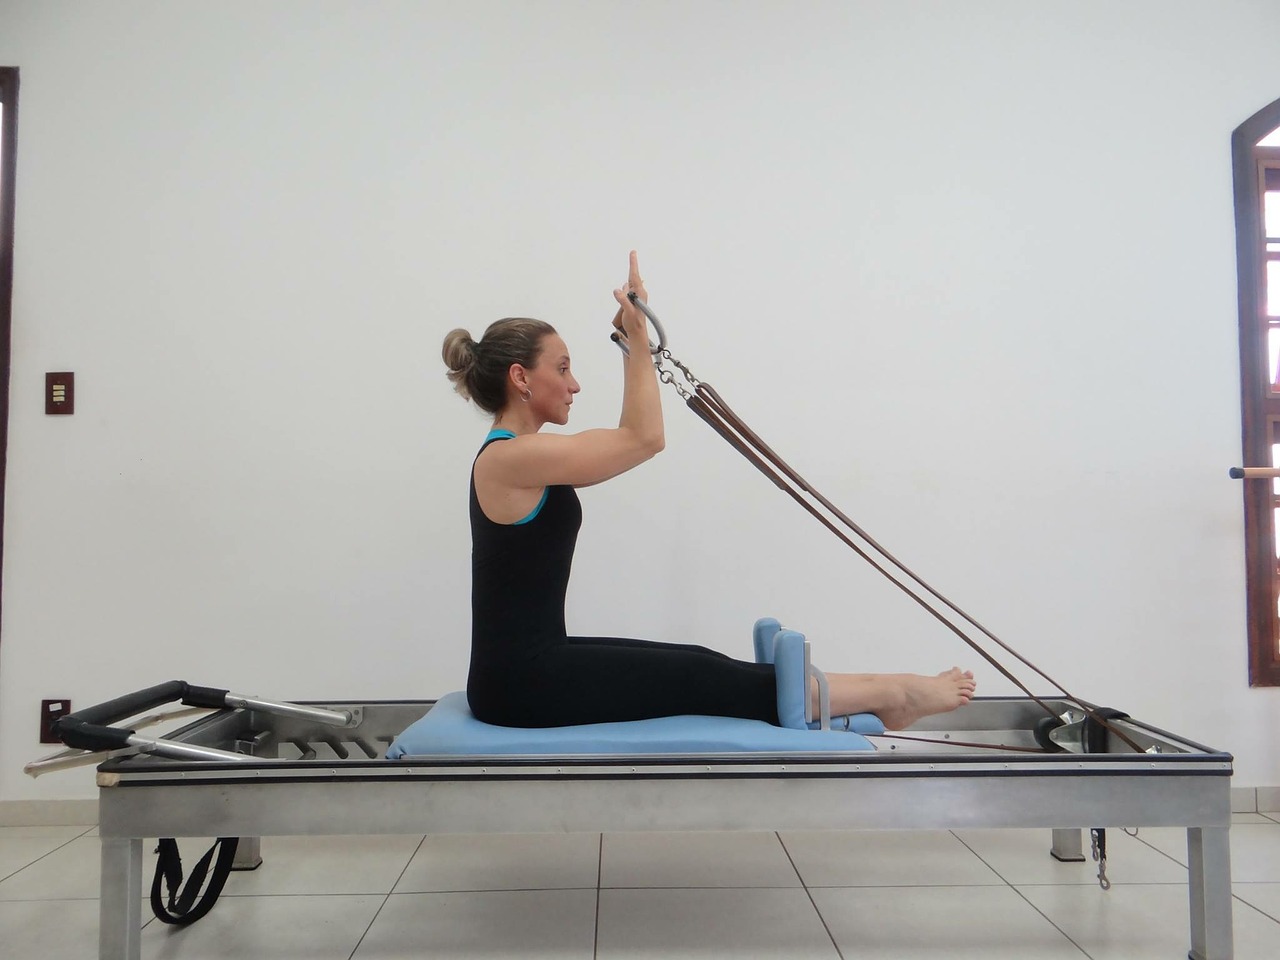 Download Free Photo Of Pilates Reformer Balance Free Pictures Free Photos From Needpix Com